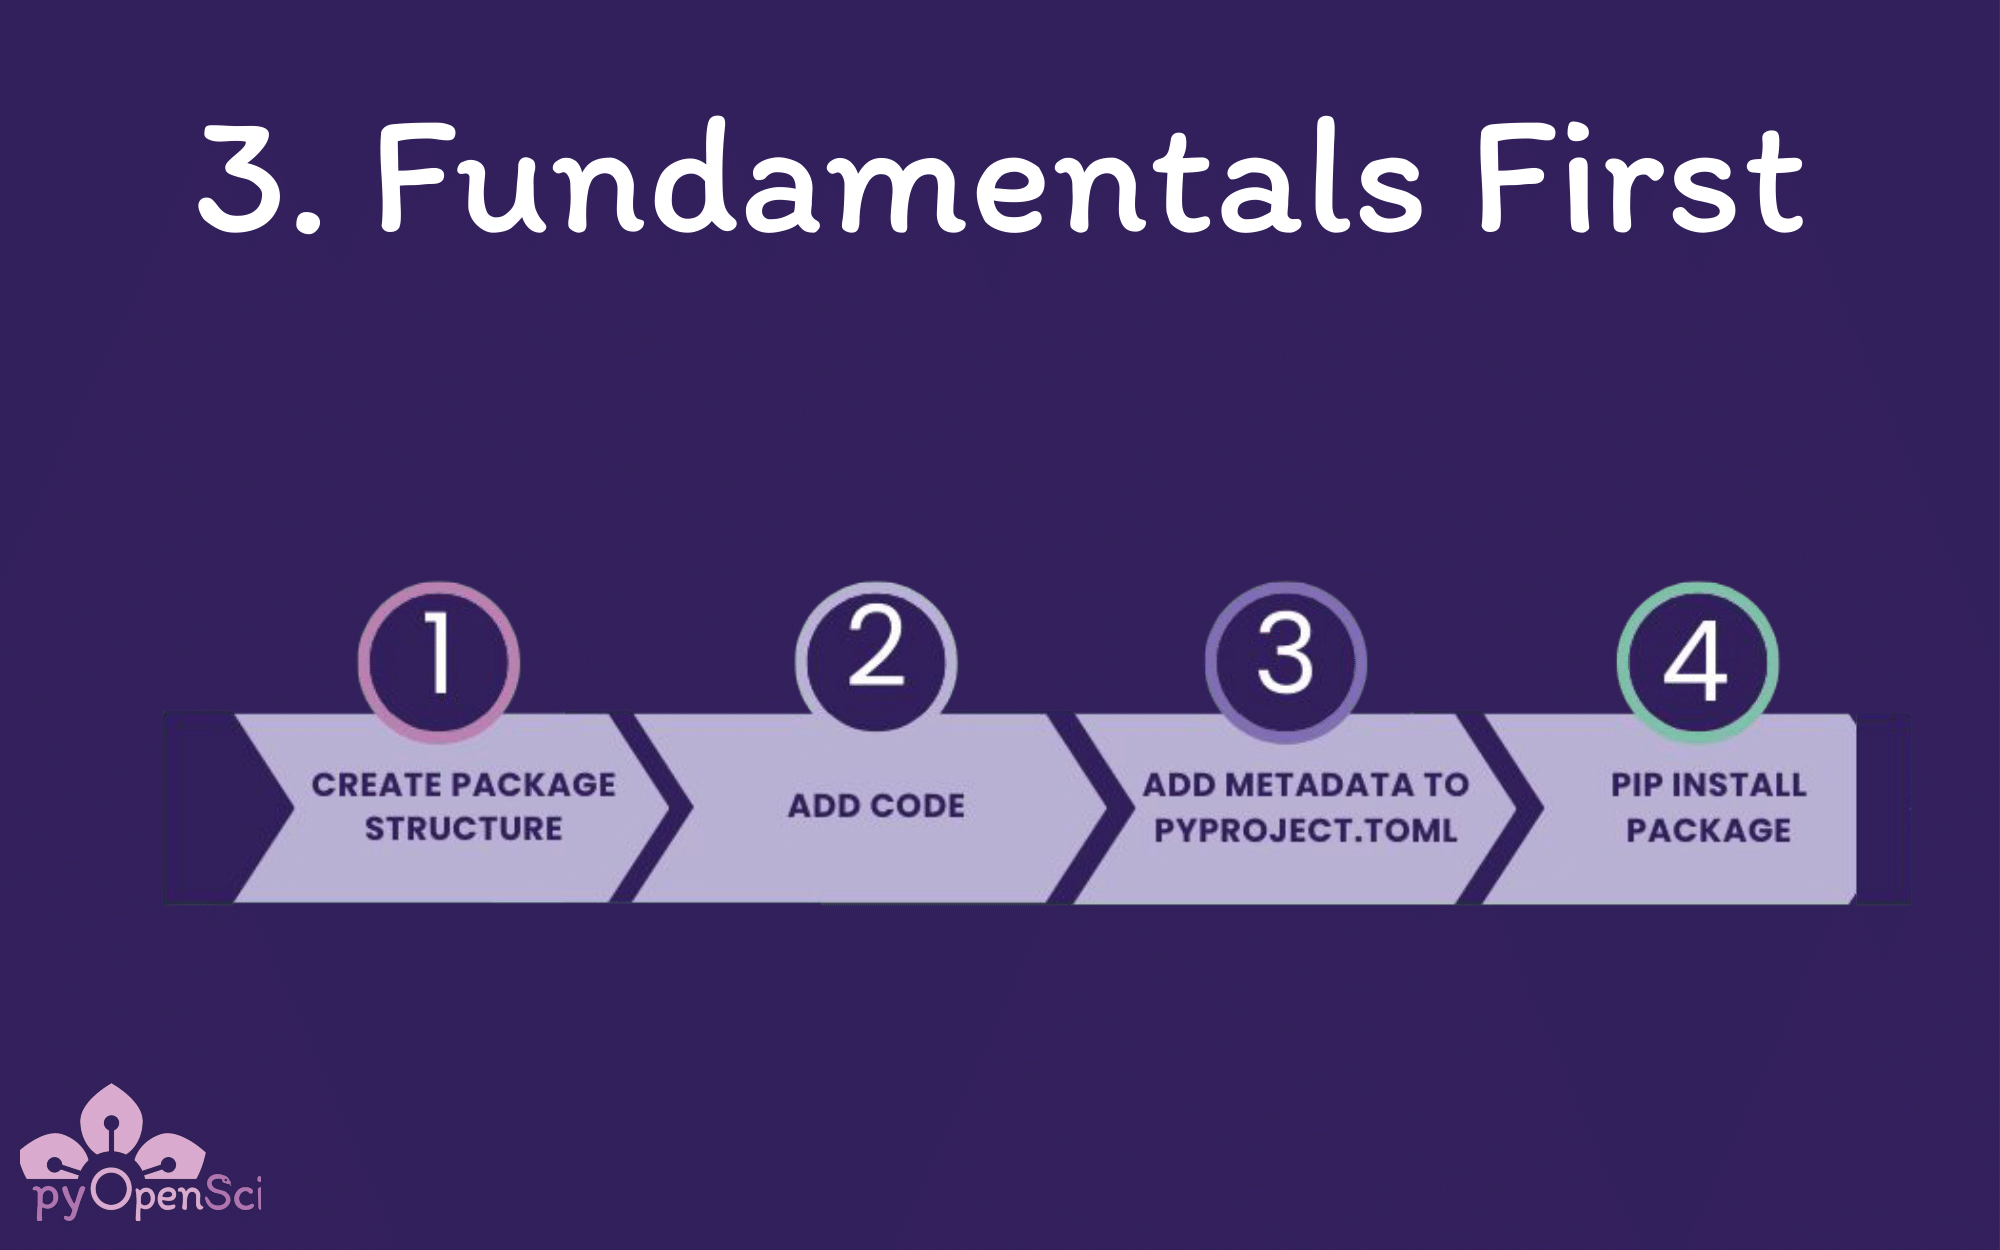 Dark purple image that says Fundamentals First. Below are 4 steps in the packaging process that say 1 create package structure, 2 add code, 3 add metadata to pyproject toml file and 4 pip install package. 